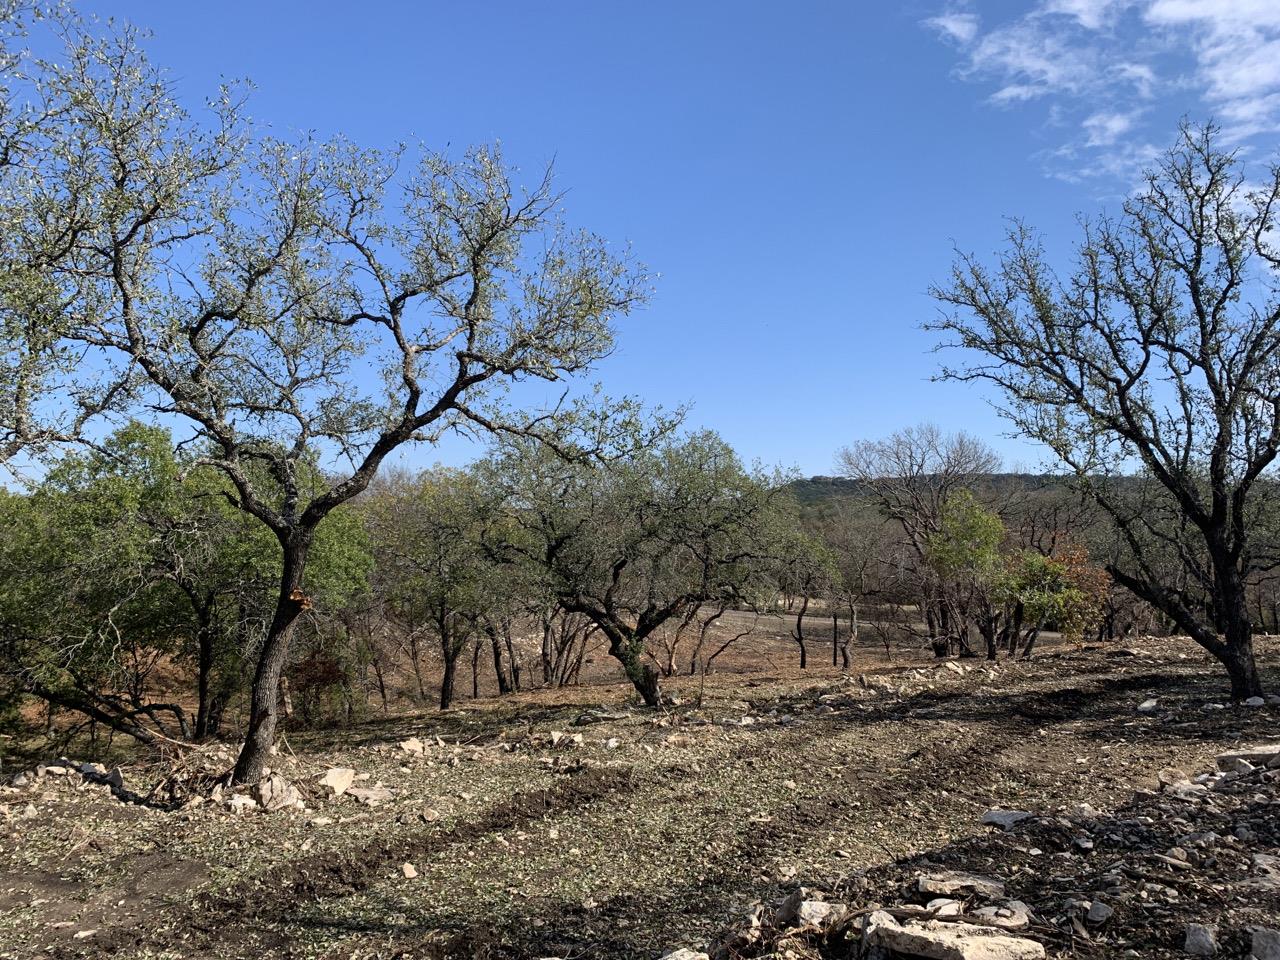 Landscape-wide shaded fuel break constructed with a forestry mulcher in Bell County, Texas